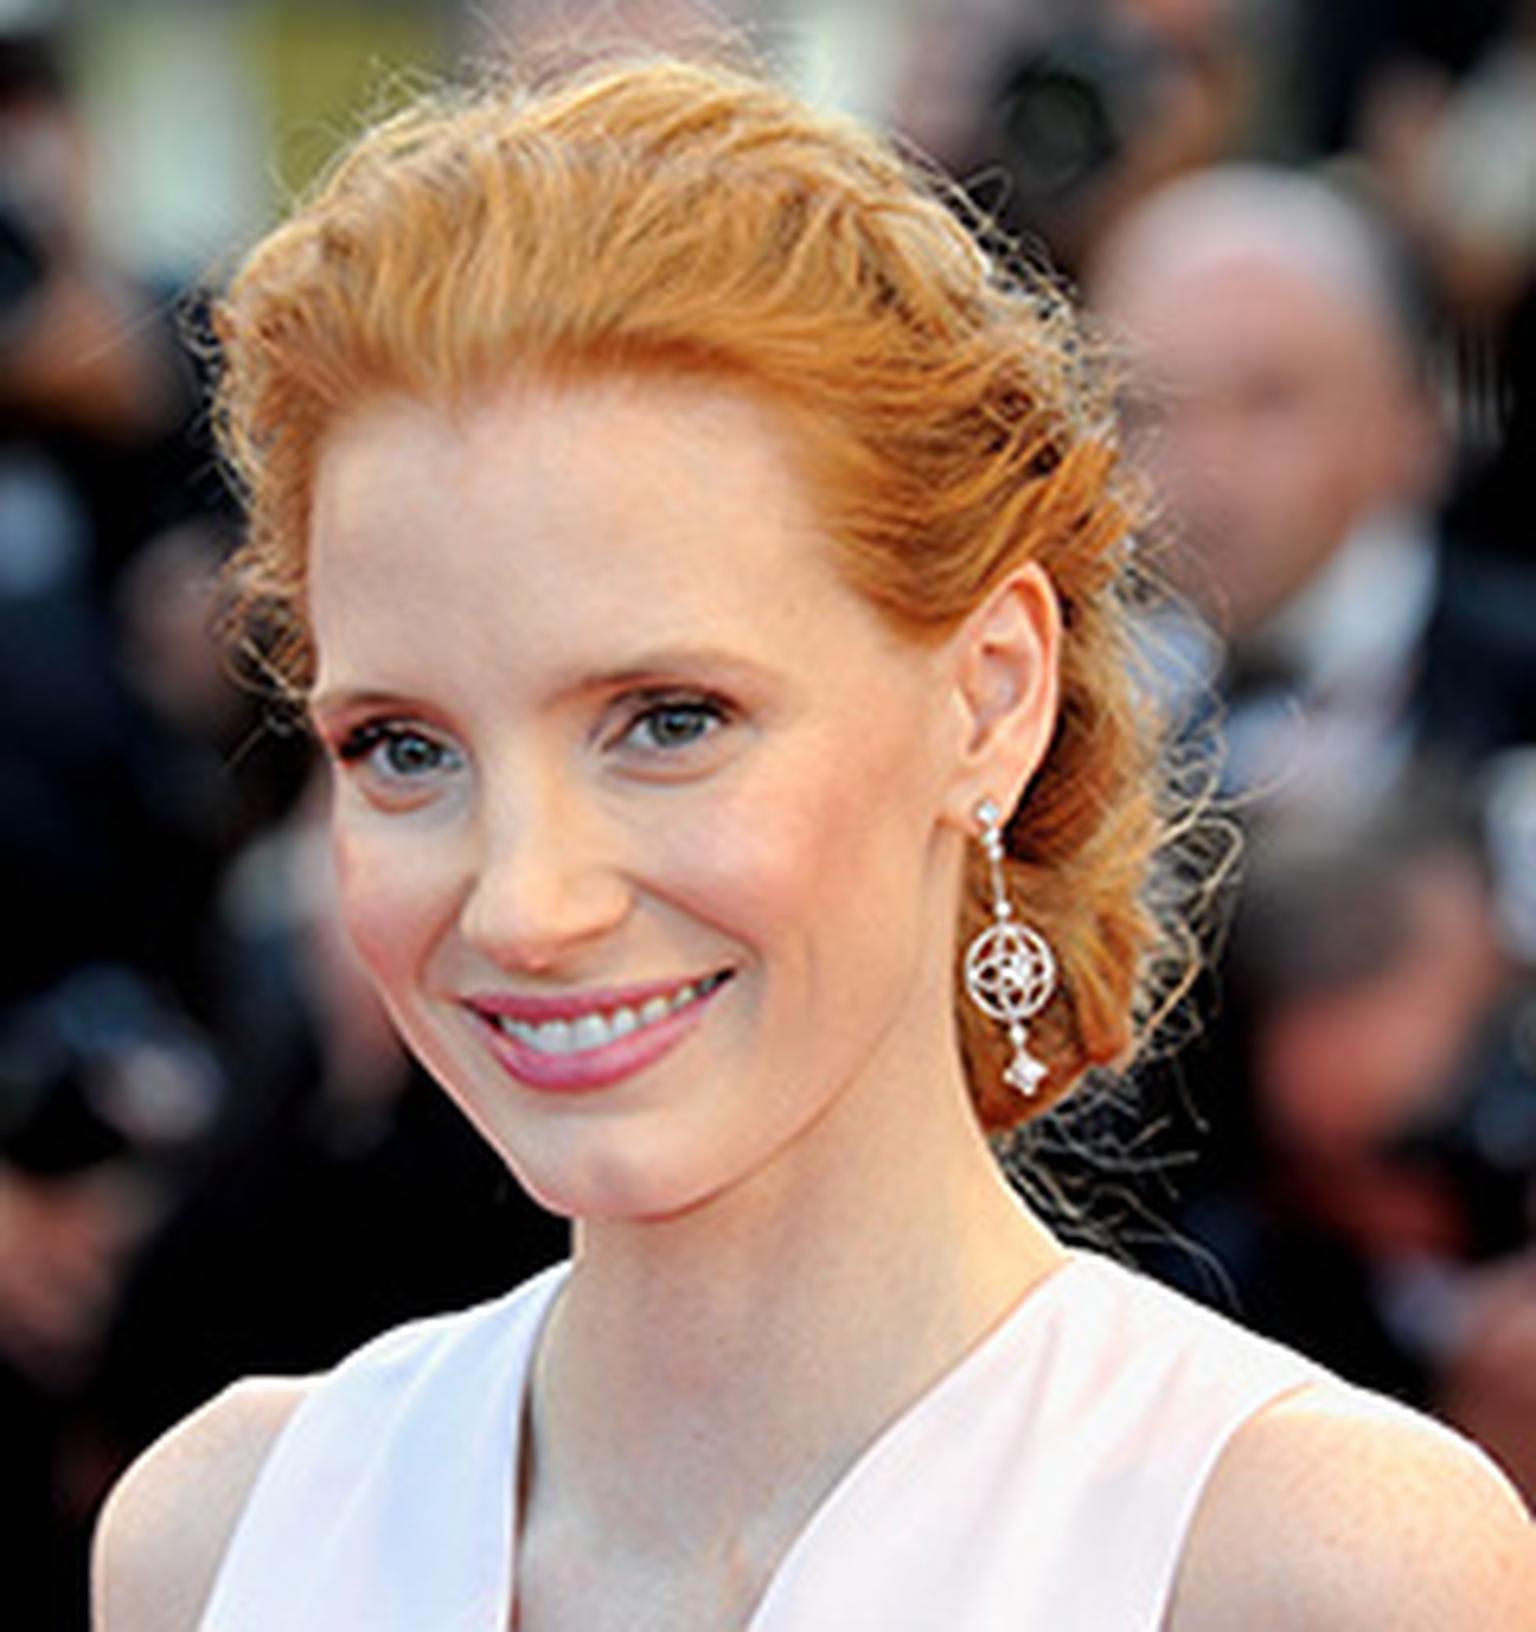 Jessica Chastain wore Louise Vuitton earrings Les Ardentes